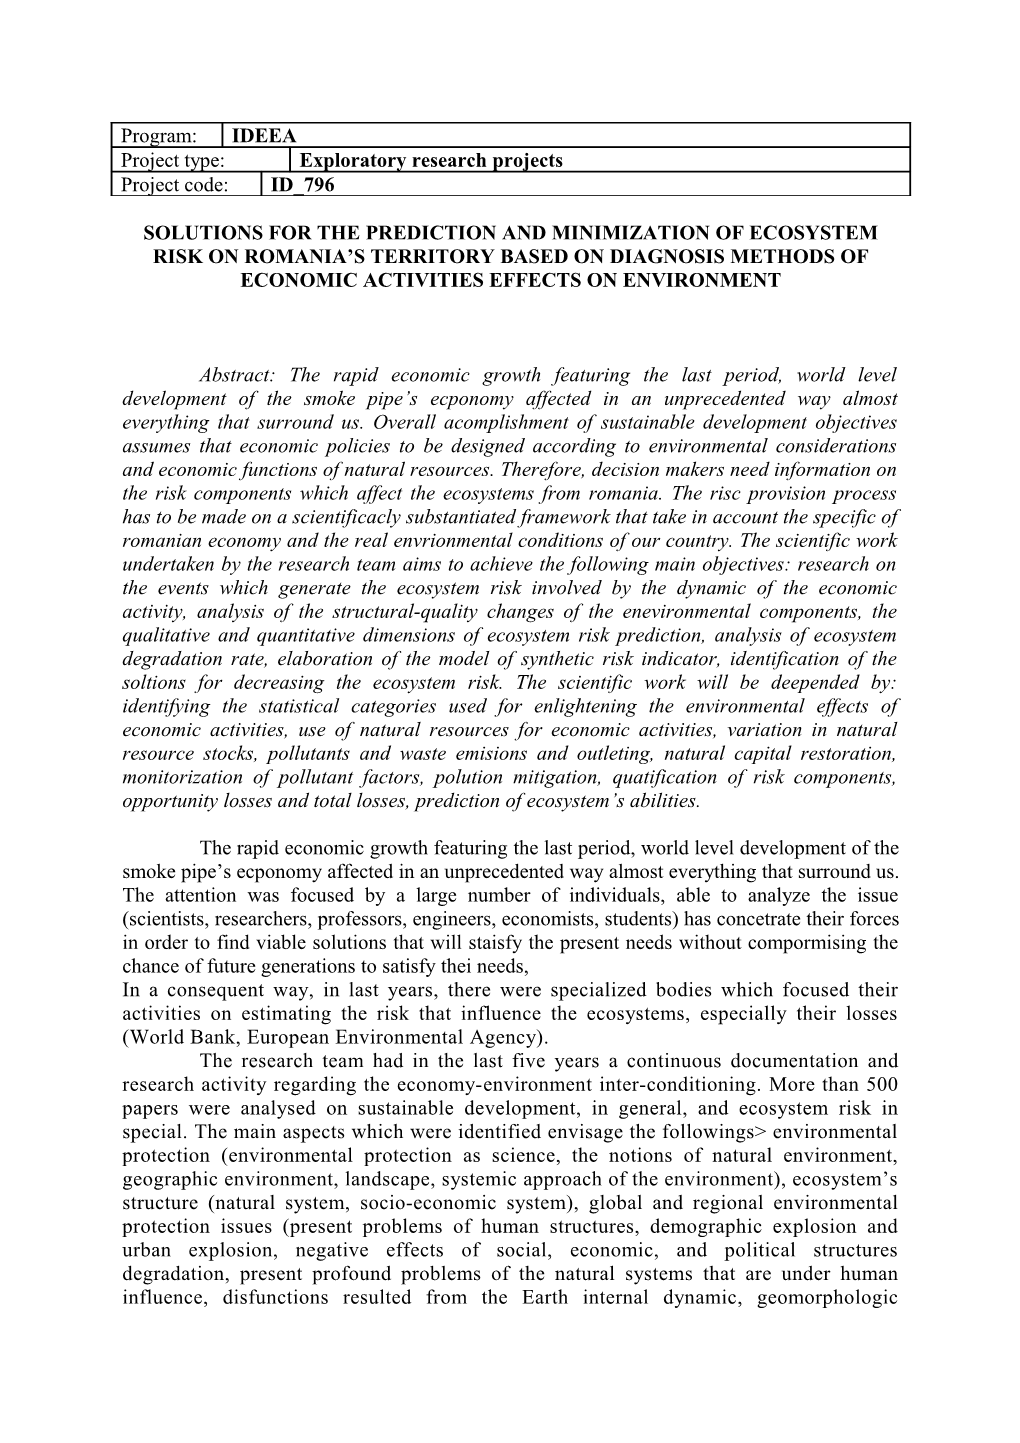 Abstract: the Rapid Economic Growth Featuring the Last Period, World Level Development